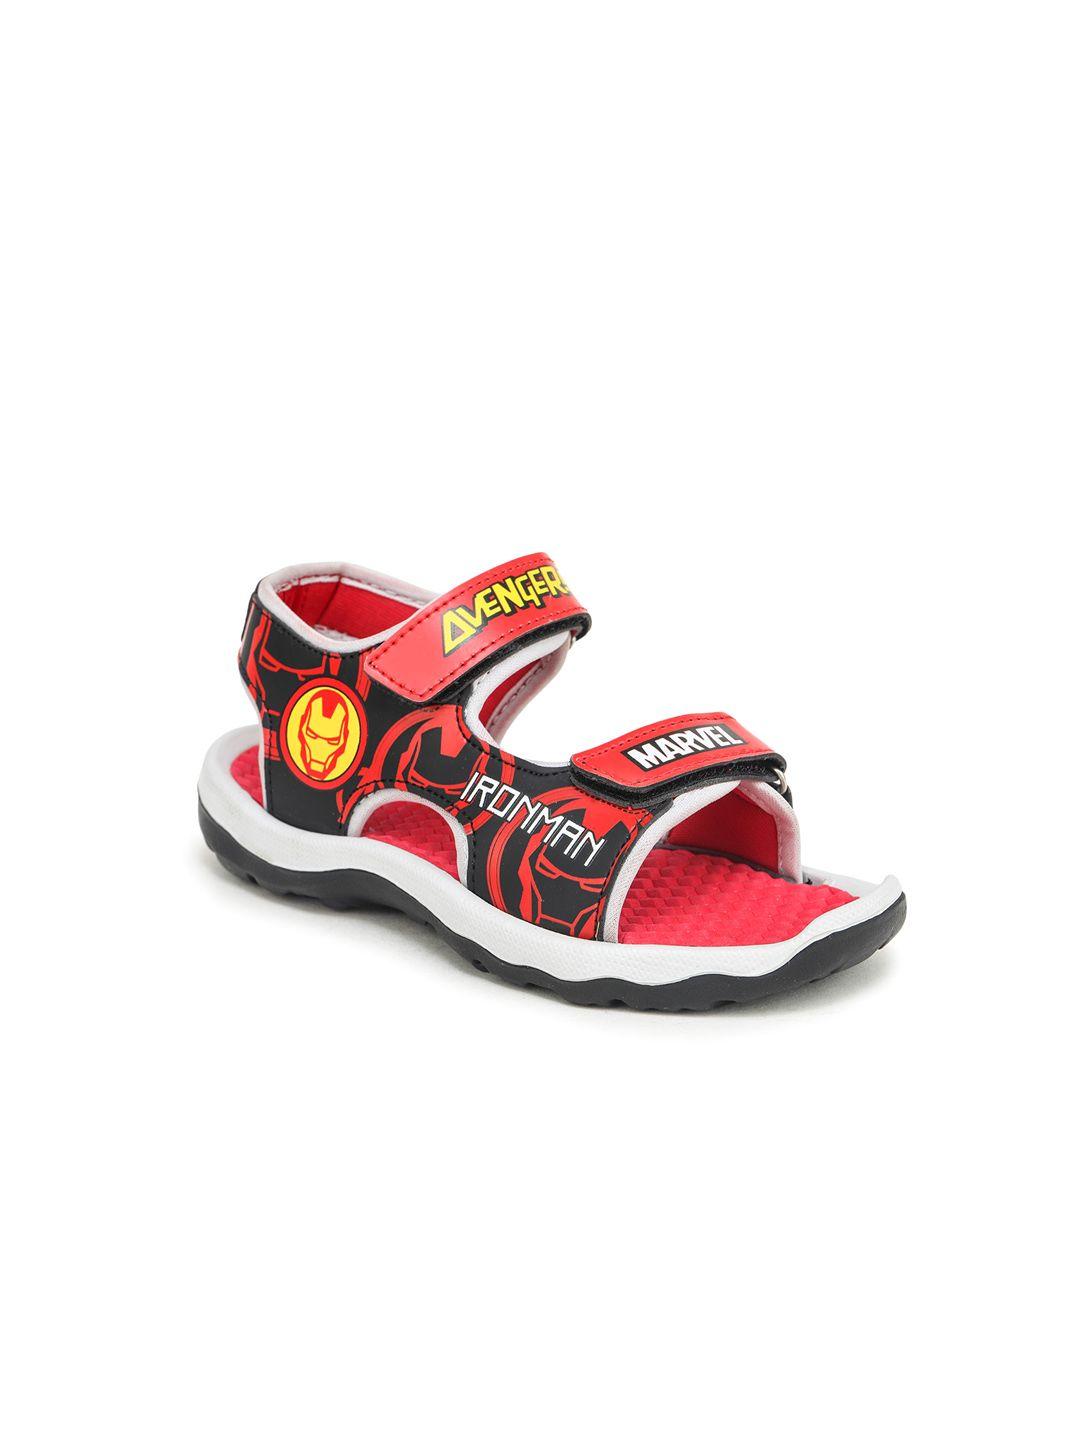 toothless-boys-avengers-printed-sports-sandals